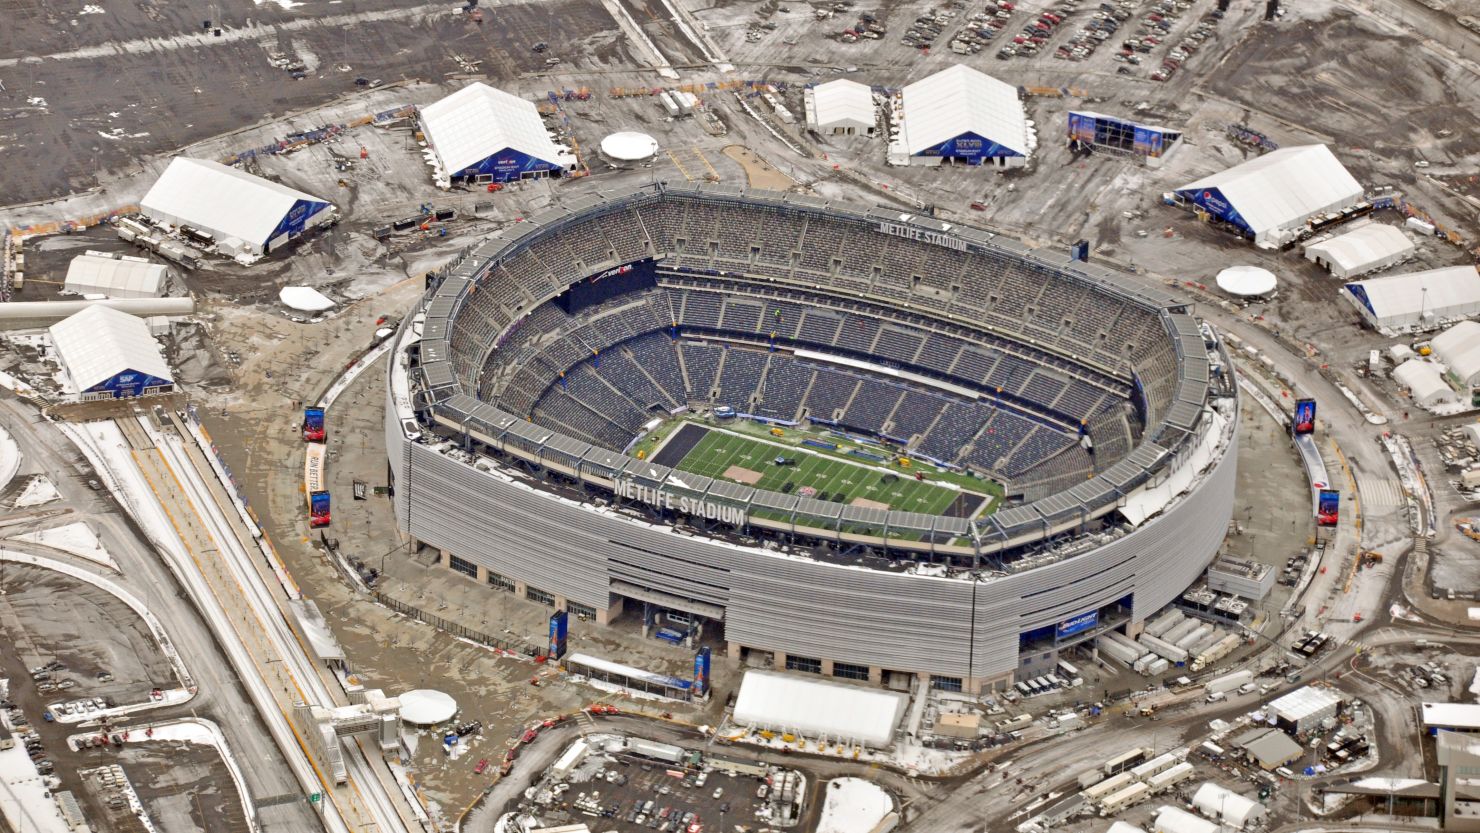 An aerial view shows MetLife Stadium this week as crews ready the East Rutherford, New Jersey, venue for Super Bowl XLVIII.